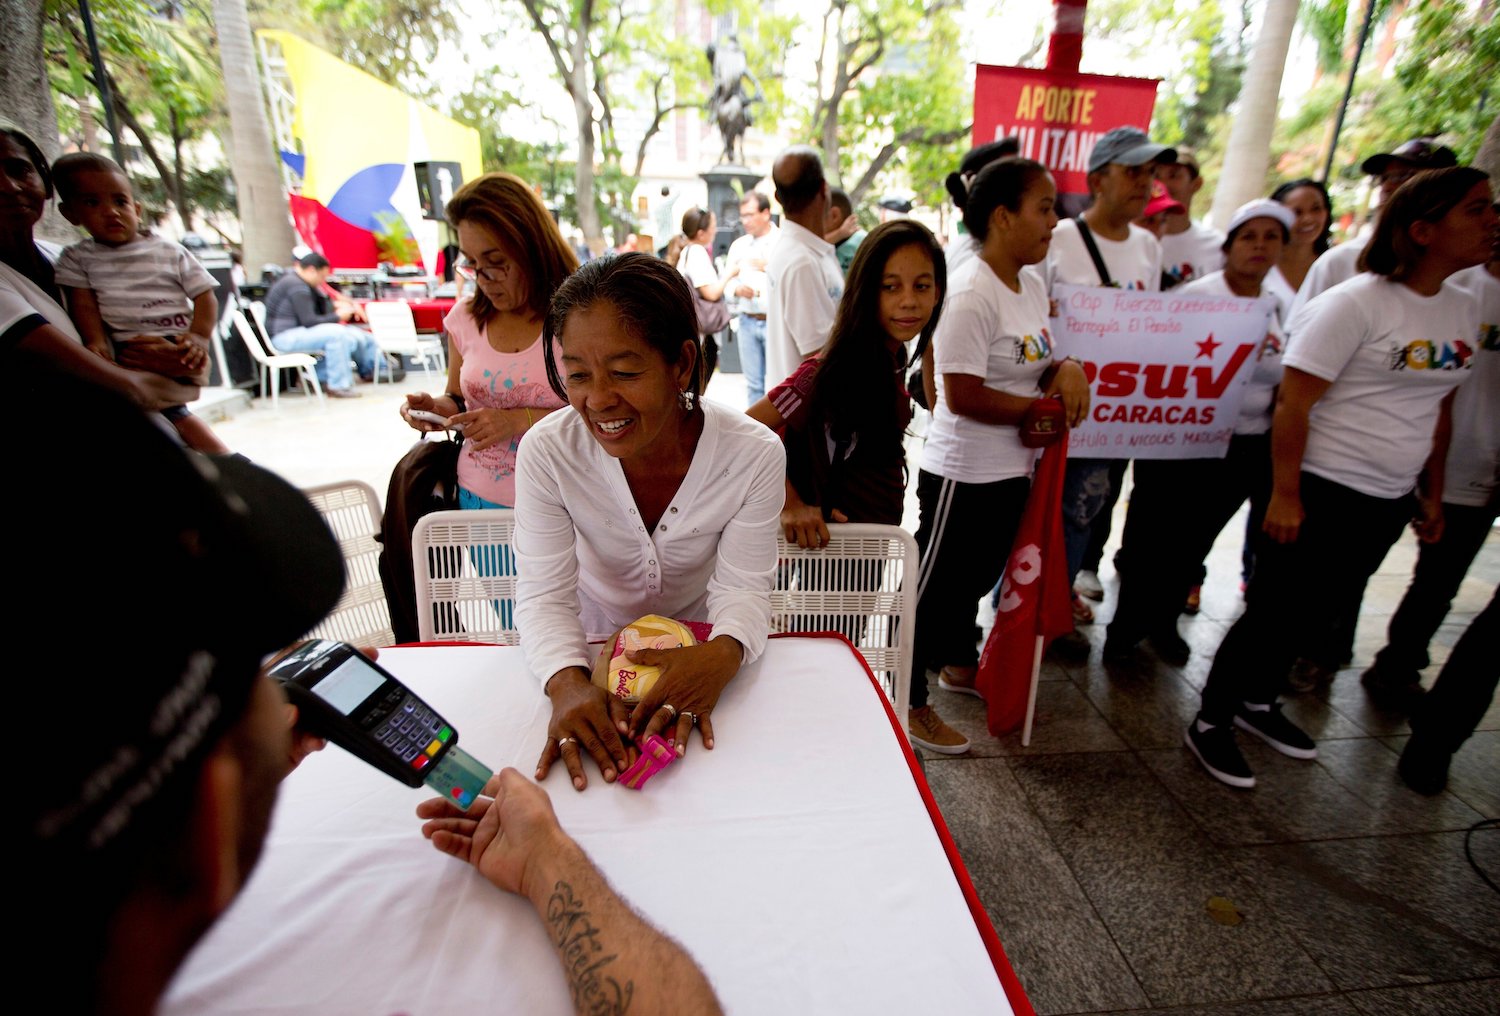 A member of the pro-government United Socialist Party of Venezuela, PSUV, donates to finance the Party, during a rally in Caracas, Venezuela, April 16, 2018. (AP/Fernando Llano)